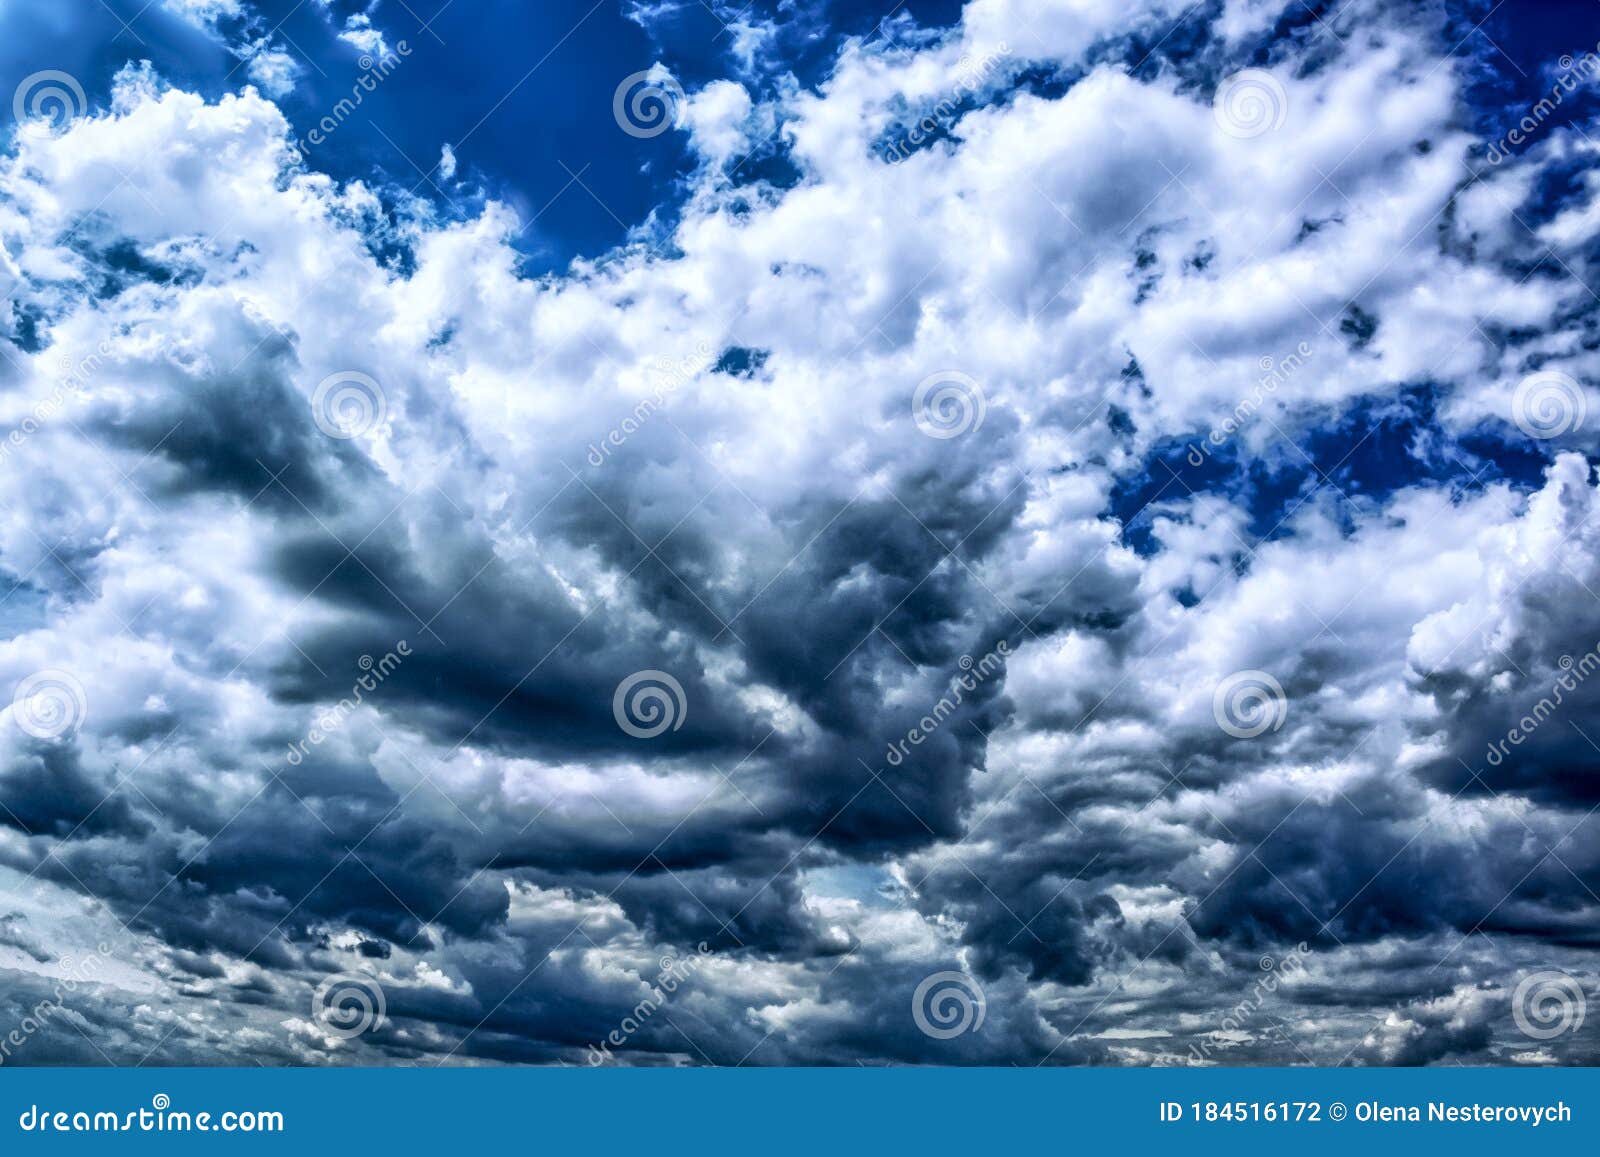 Storm Dramatic Clouds Dramatic Sky Over Sea Wide Banner Background With Copy Space Stock Photo Image Of Moody Cloud